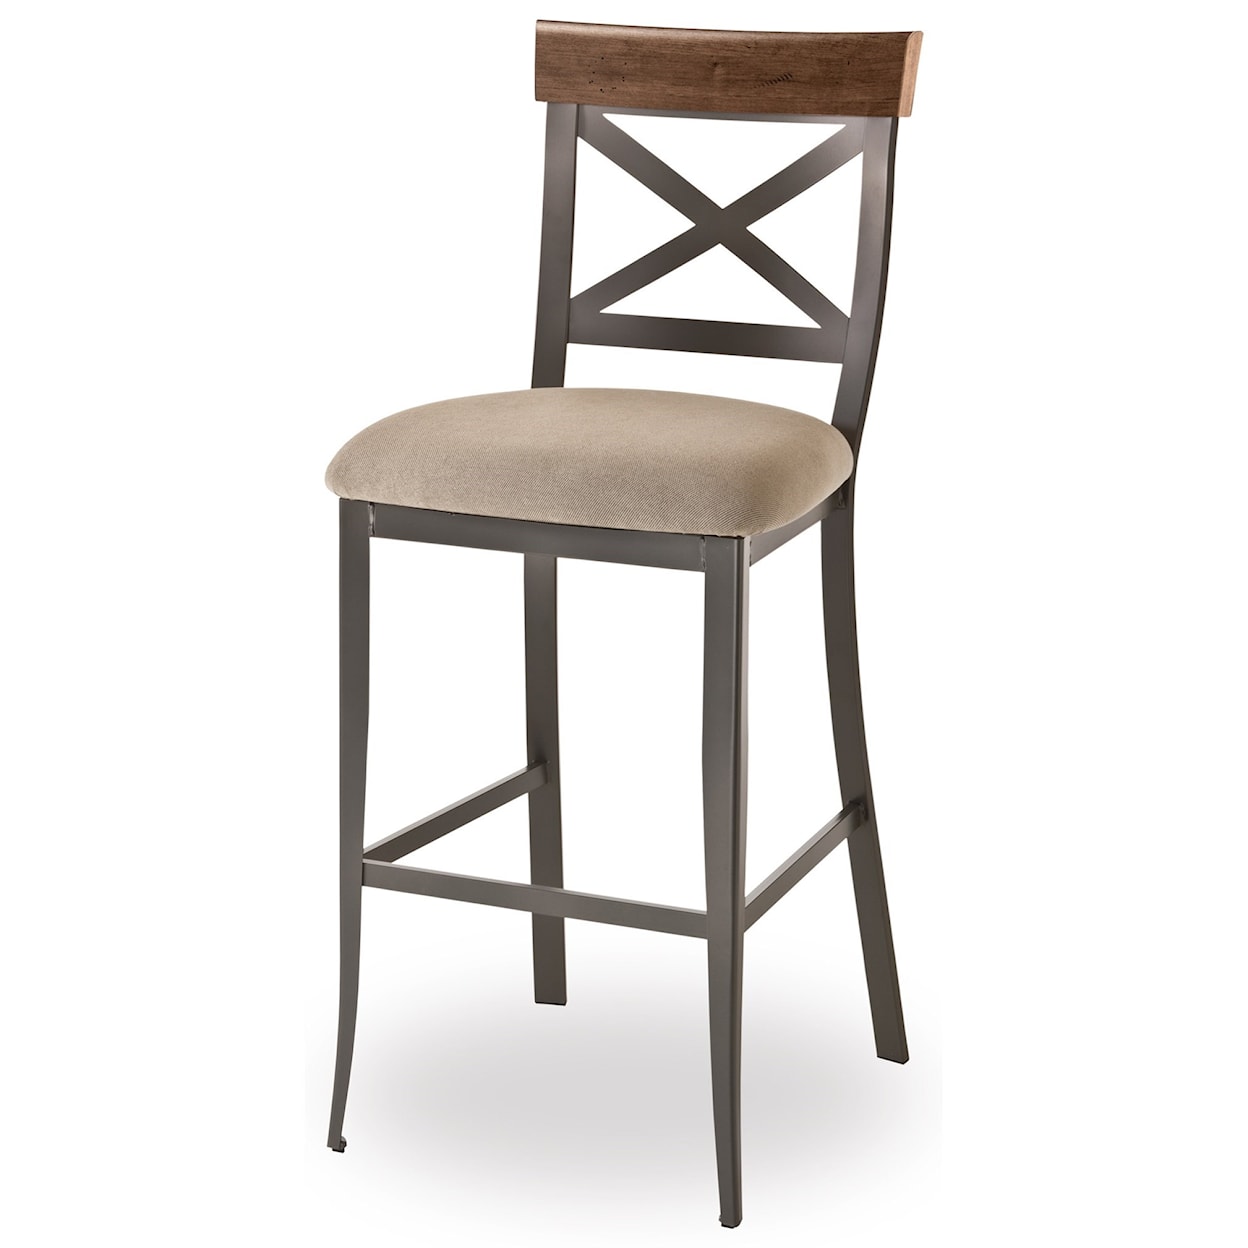 Amisco Industrial 26" Kyle Stool with Upholstered Seat